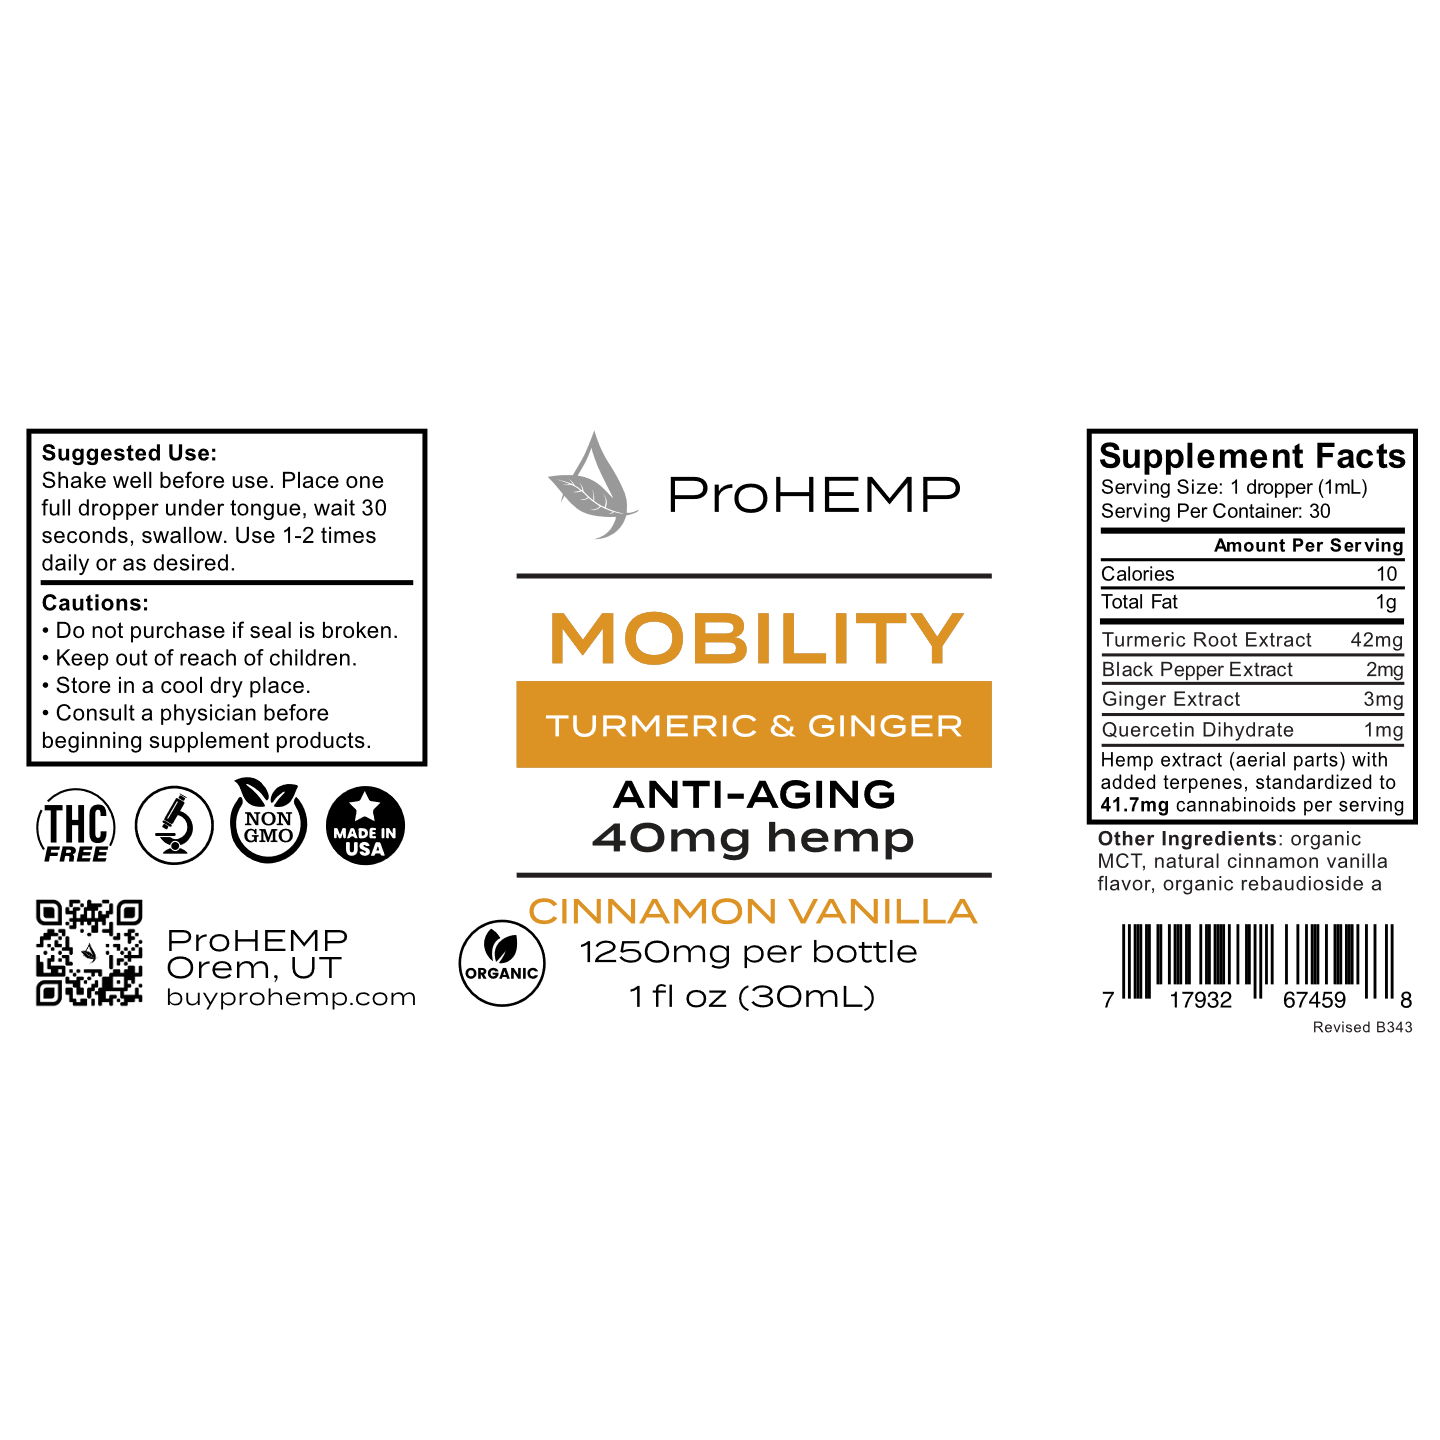 Mobility Adaptogenic - Anti-Aging with Turmeric, Ginger, & 1250 mg Hemp